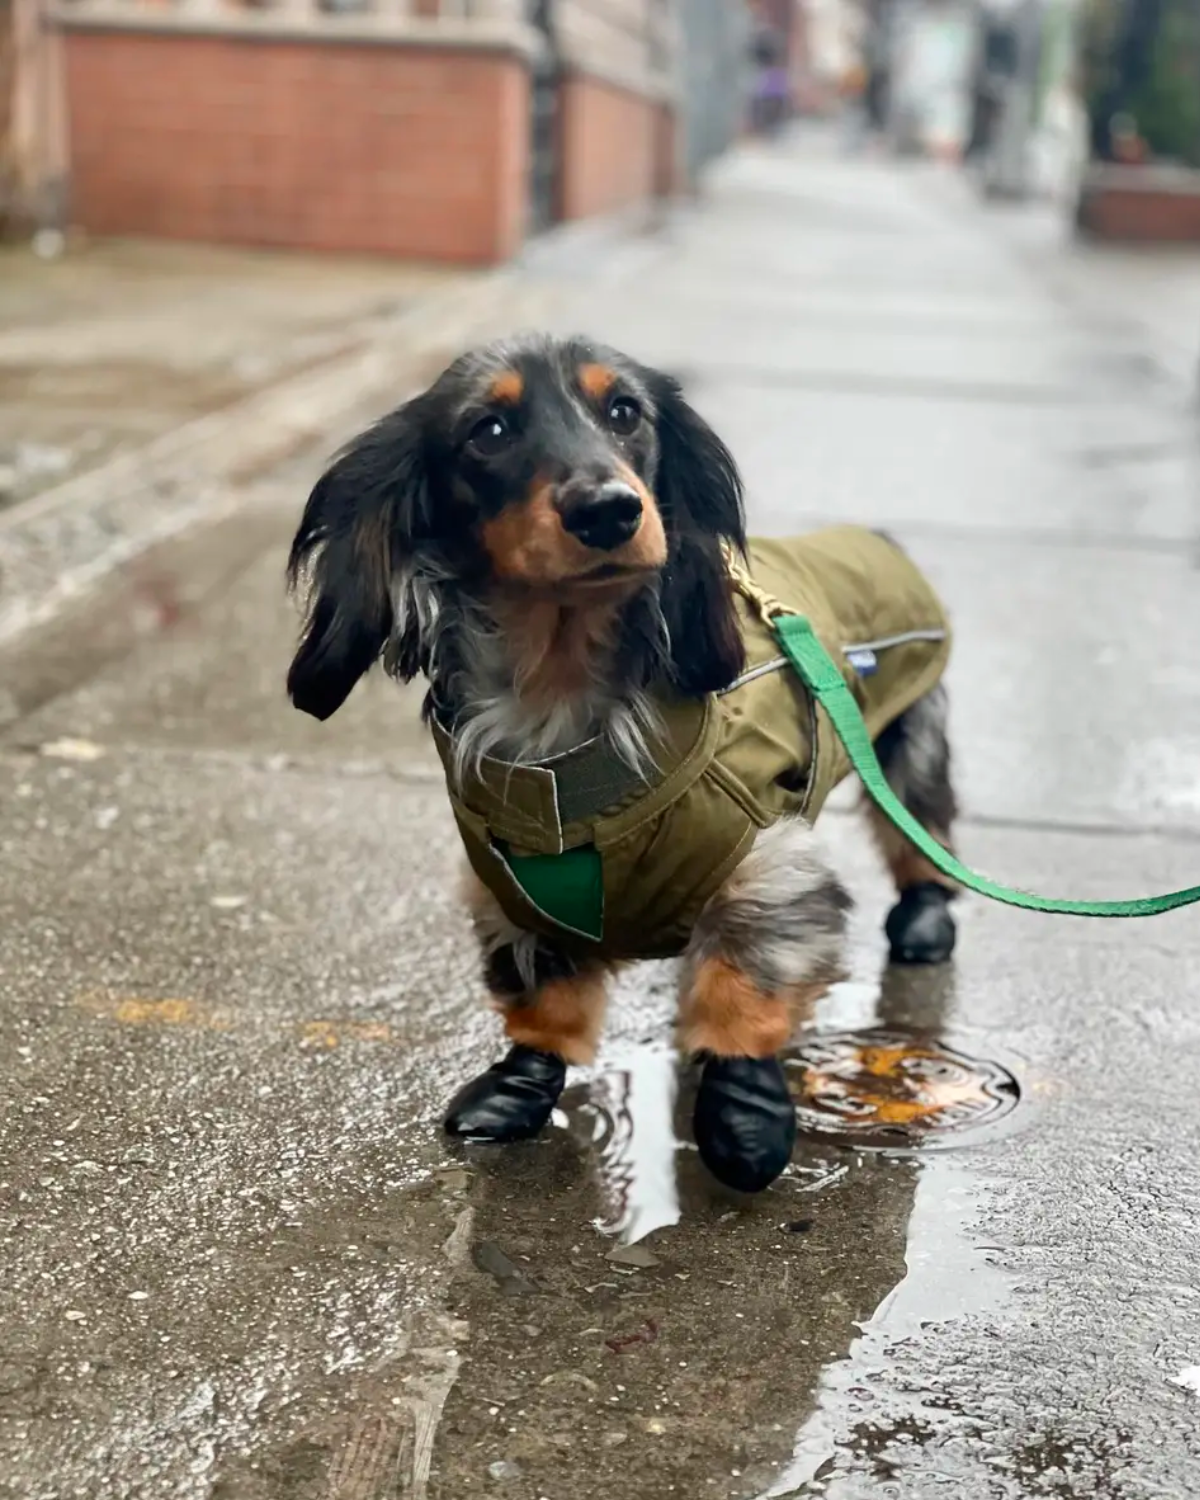 DJANGO's City Slicker Dog Jacket and Raincoat is a beautiful, lightweight dog jacket and water-resistant dog raincoat designed for spring showers, chilly autumn days, and snowy winter walks - djangobrand.com